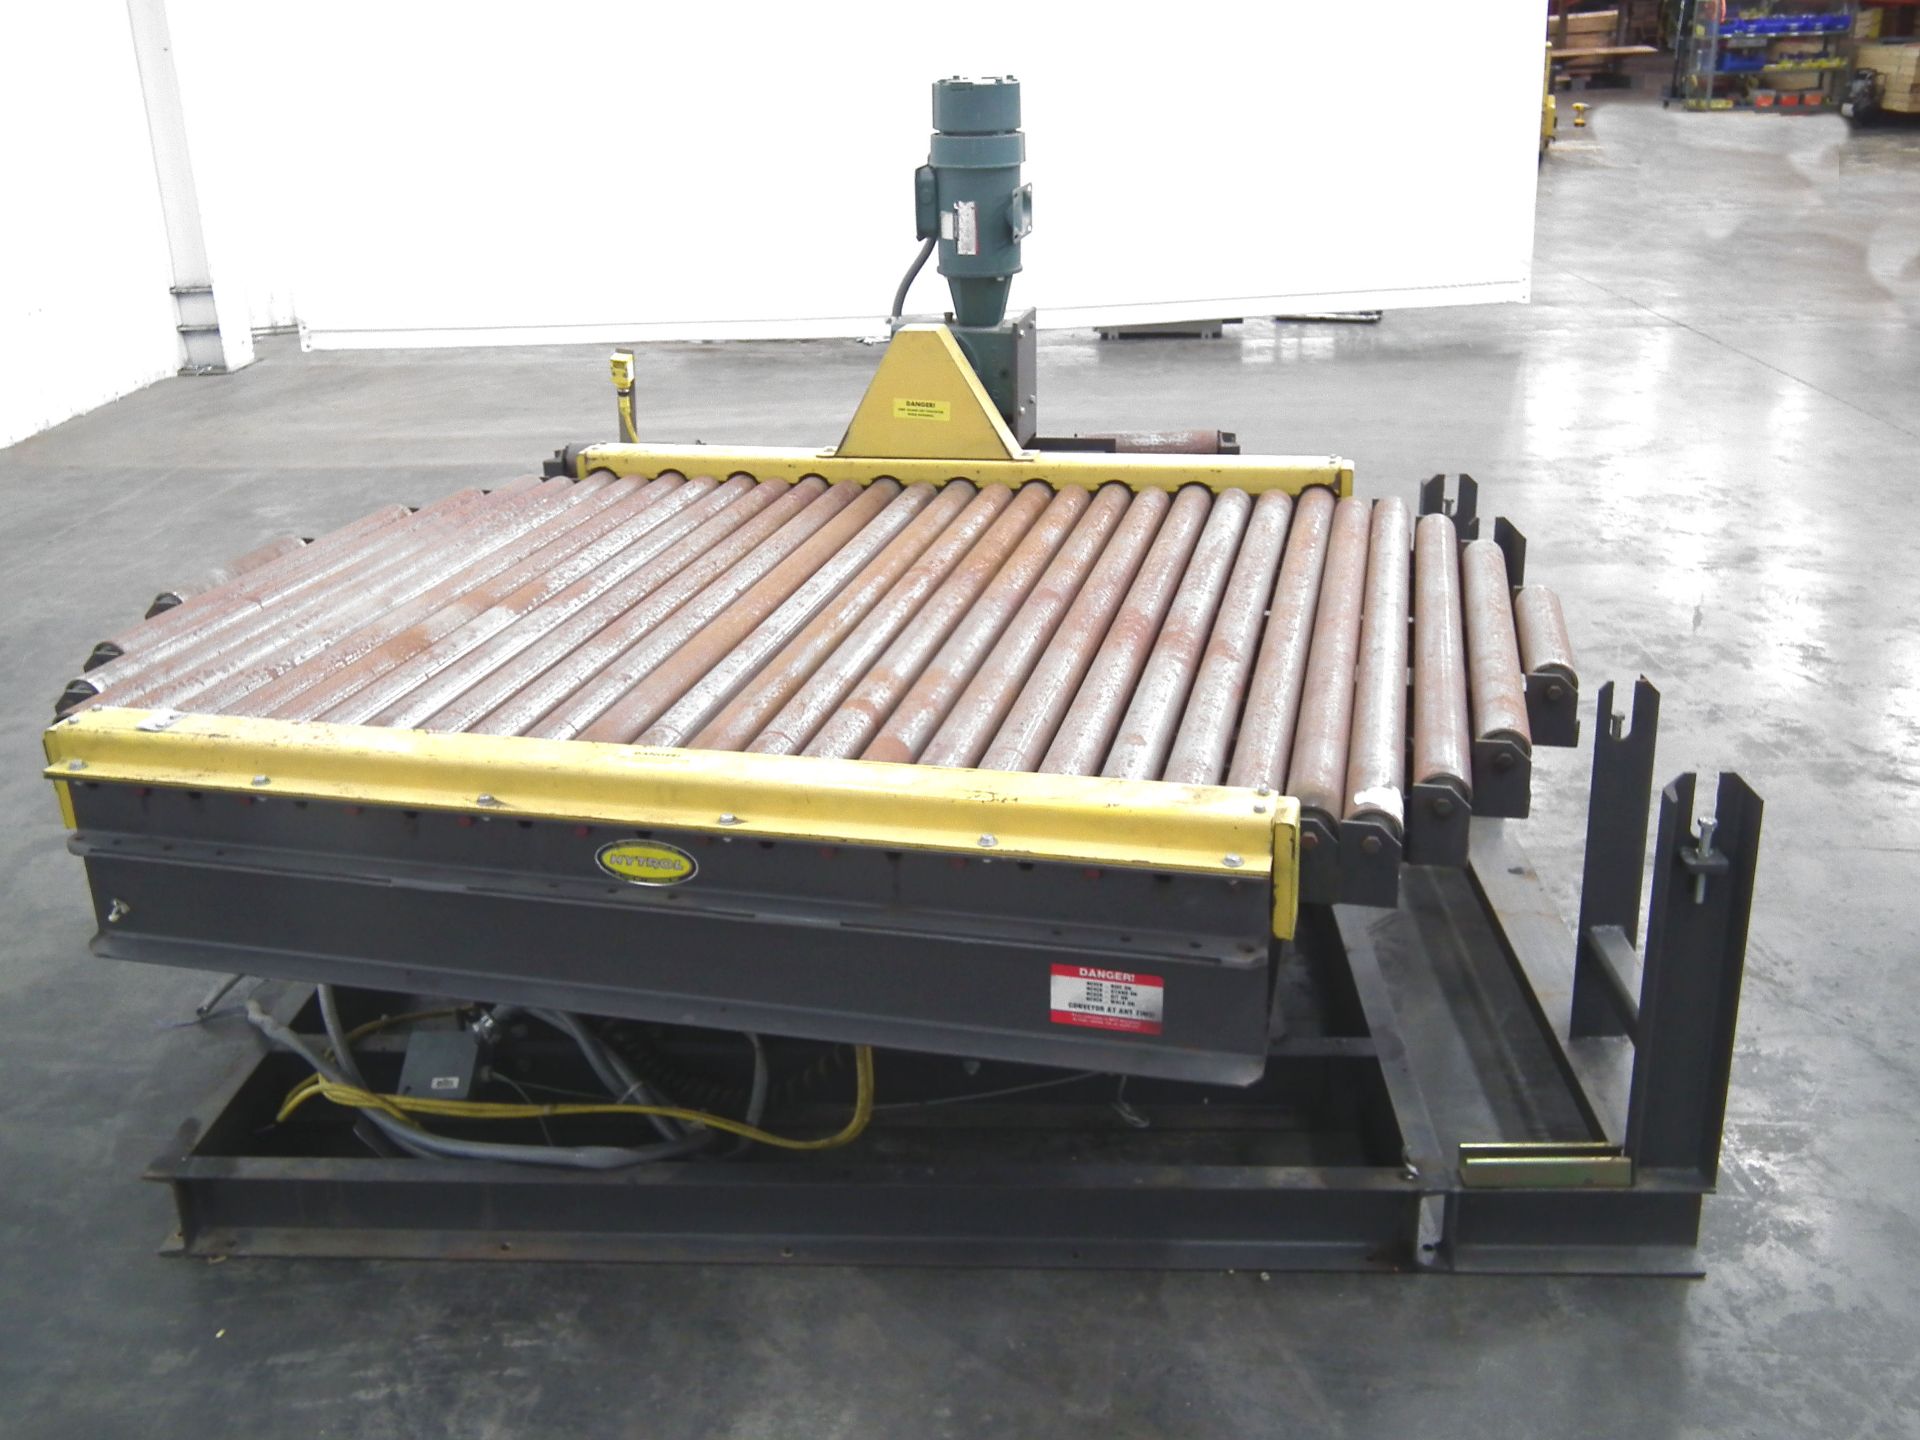 Hytrol Turntable for Full Pallets 90 Degree Motion A9776 - Image 4 of 8